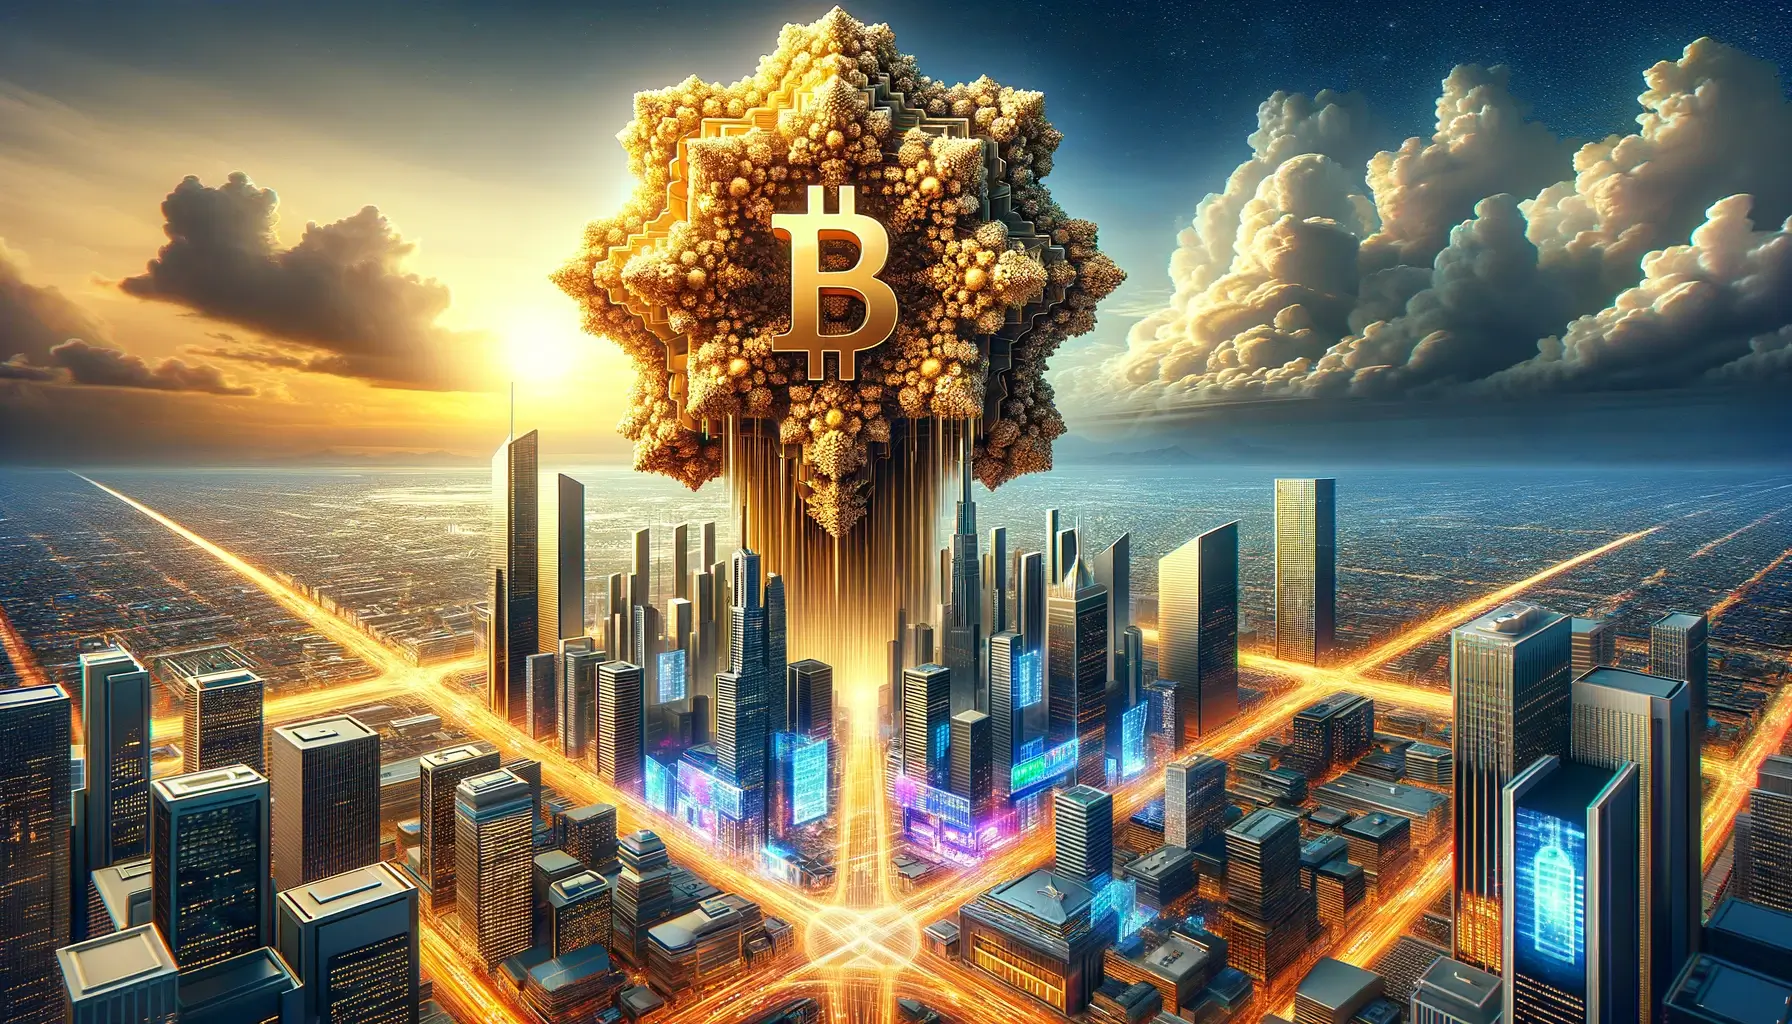 A digital artwork featuring a massive golden fractal structure towering over a bustling financial cityscape. At the pinnacle of this structure sits